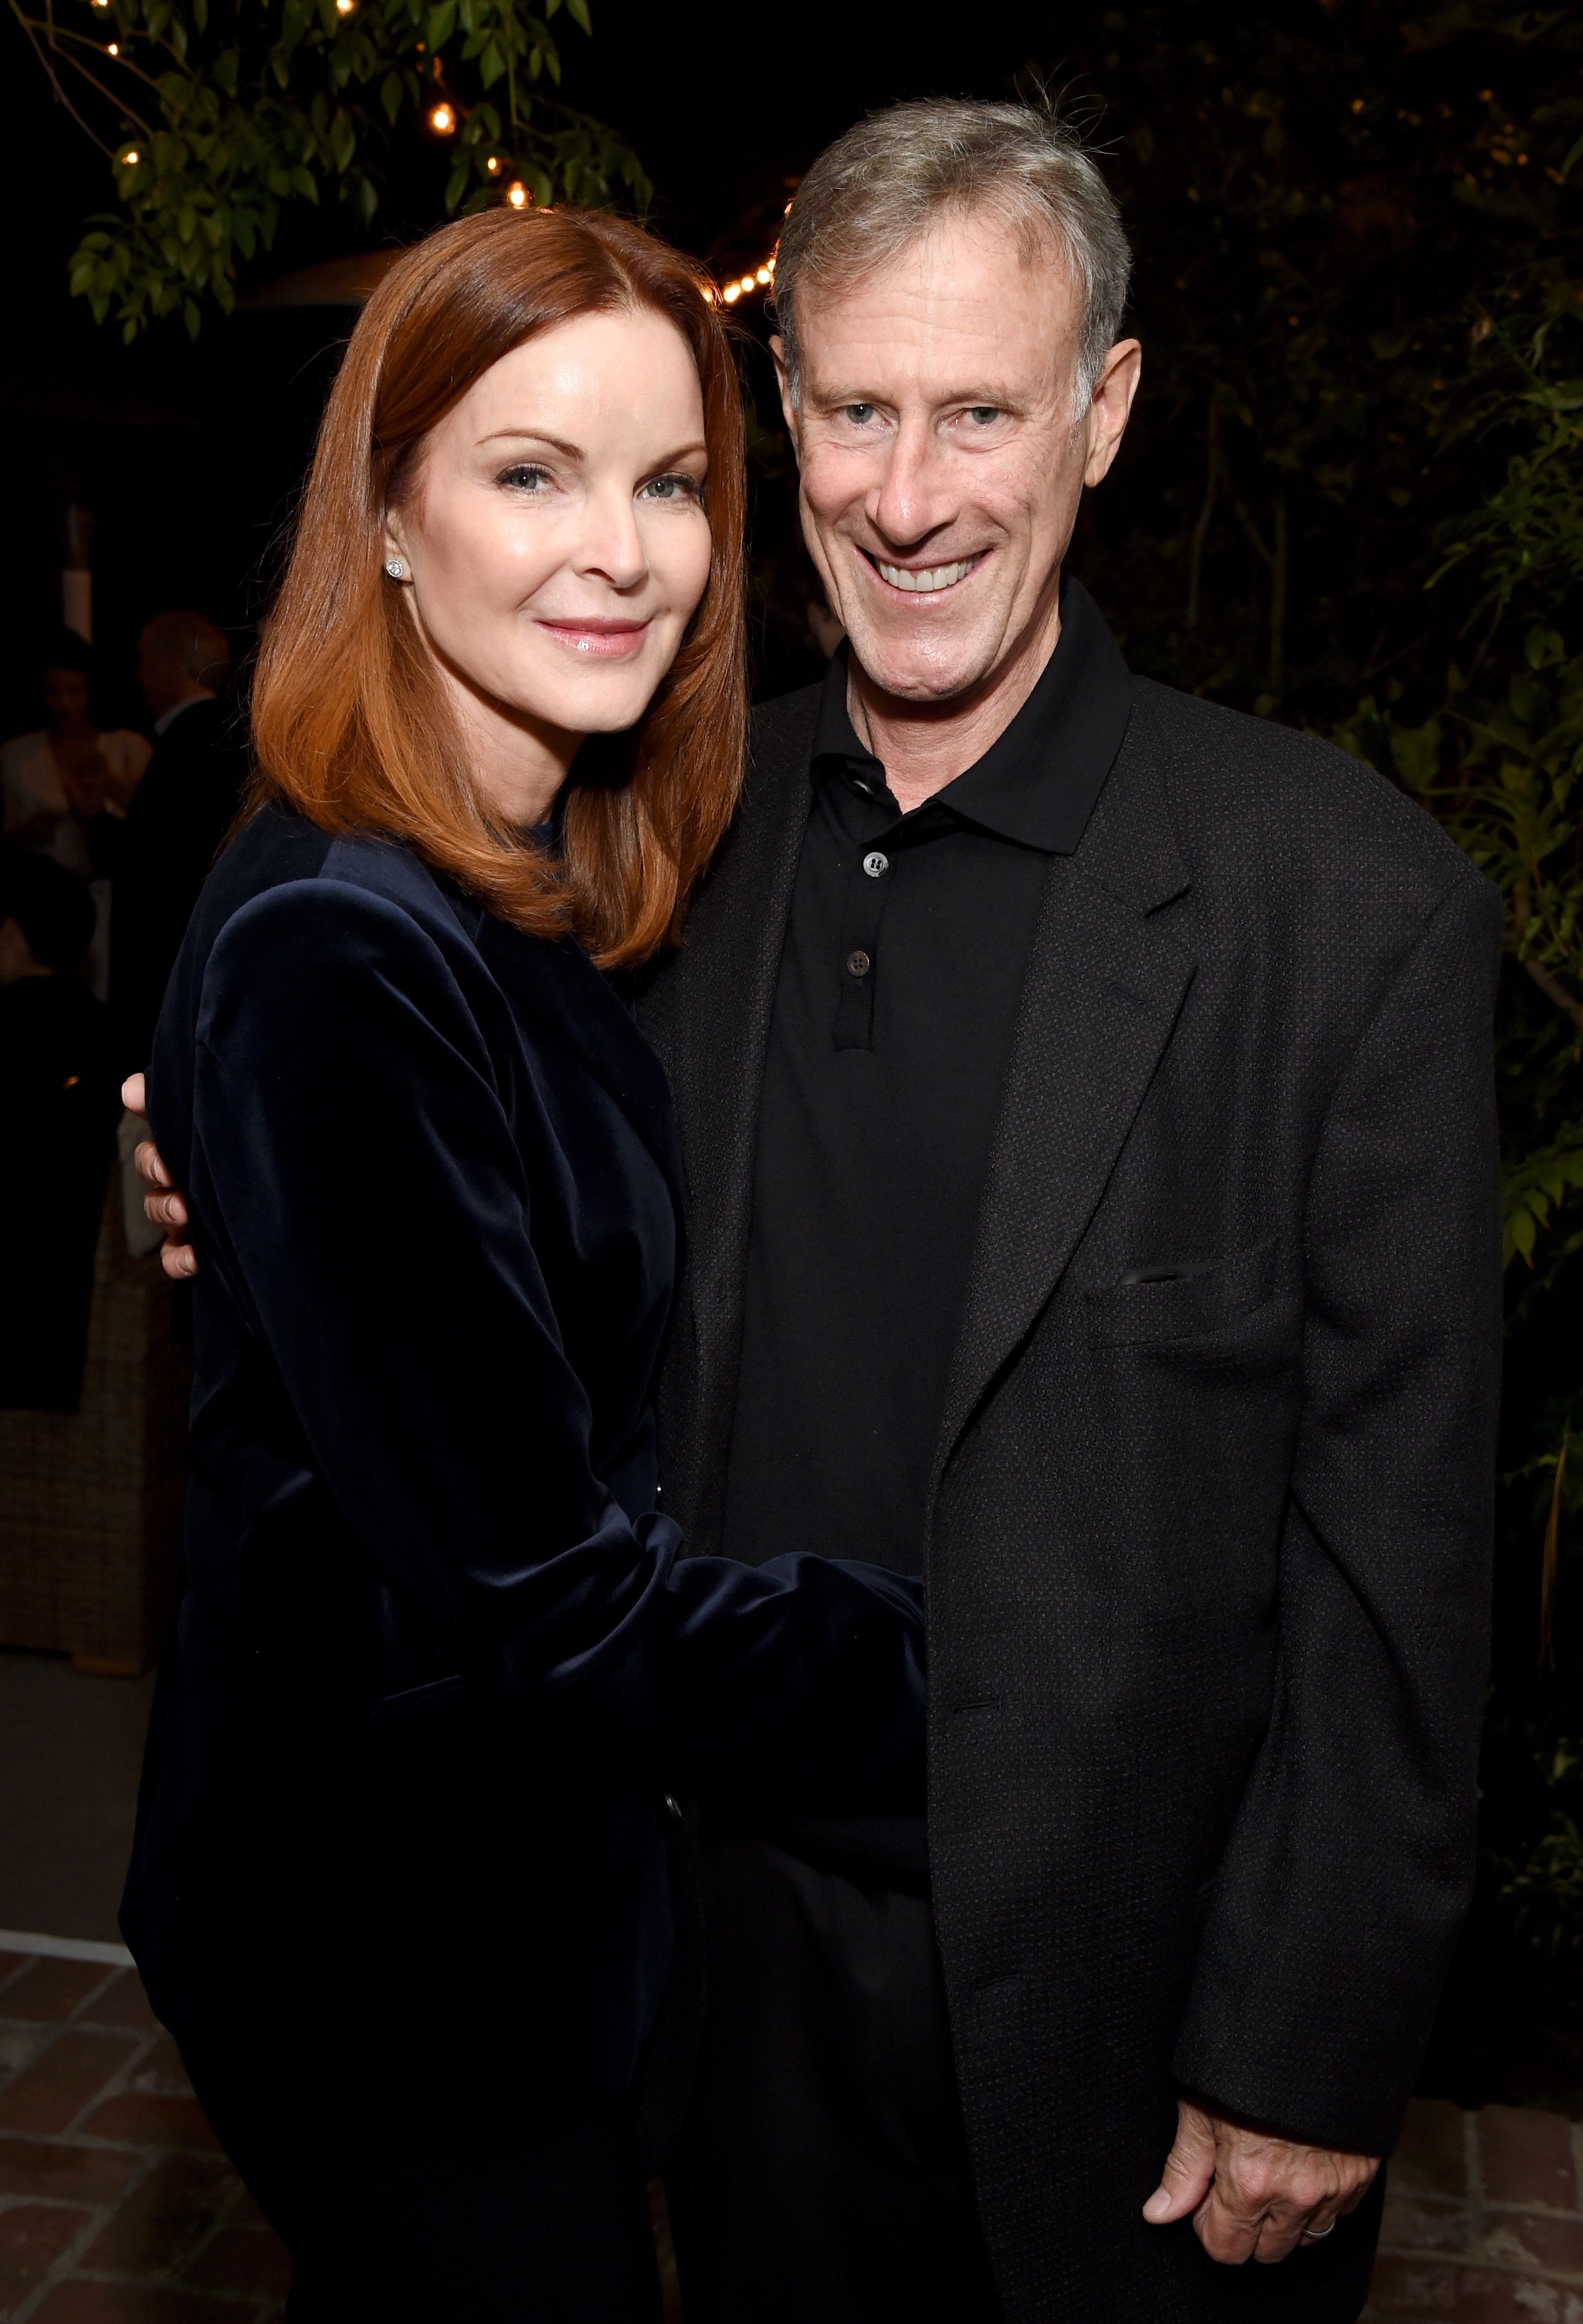 Marcia Cross and Tom Mahoney attend the 2017 Gersh Emmy Party presented by Tequila Don Julio 1942 on September 15, 2017 in Los Angeles, California.  | Source: Getty Images